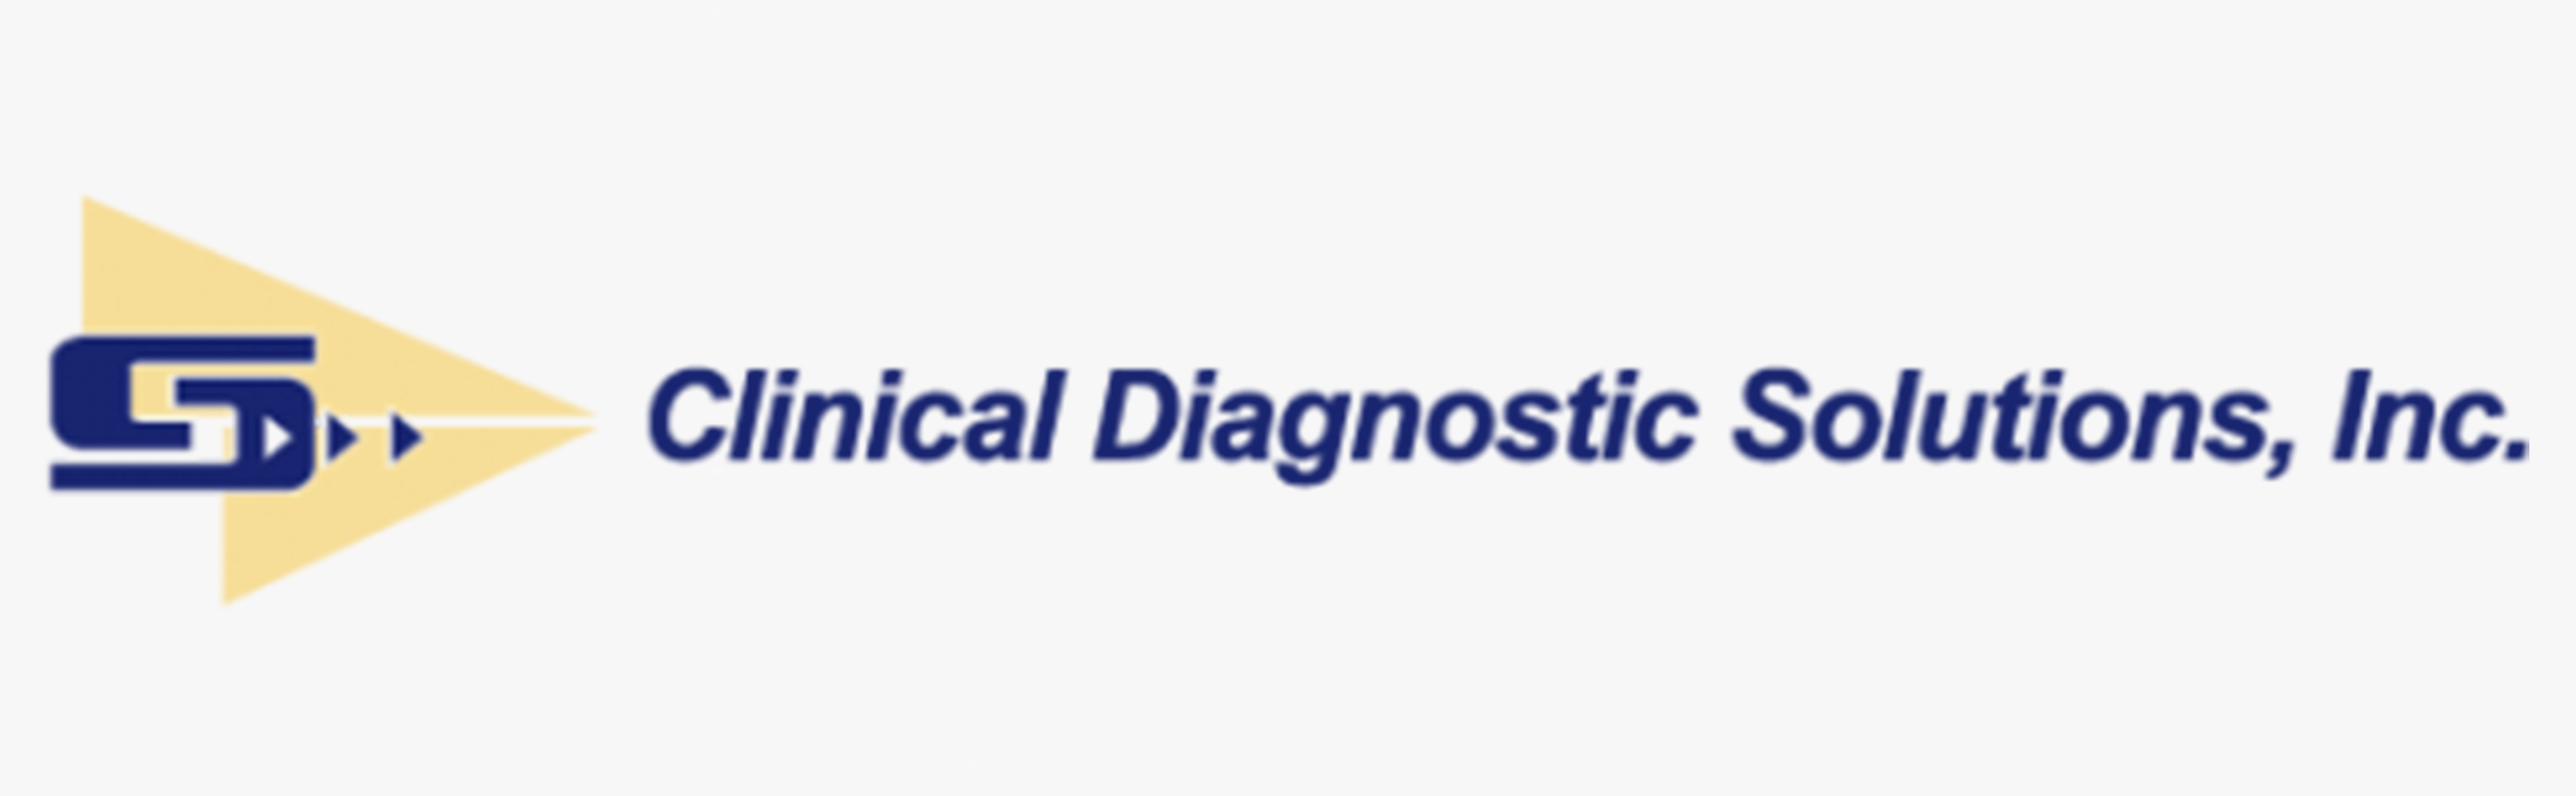 Clinical Diagnostic Solutions